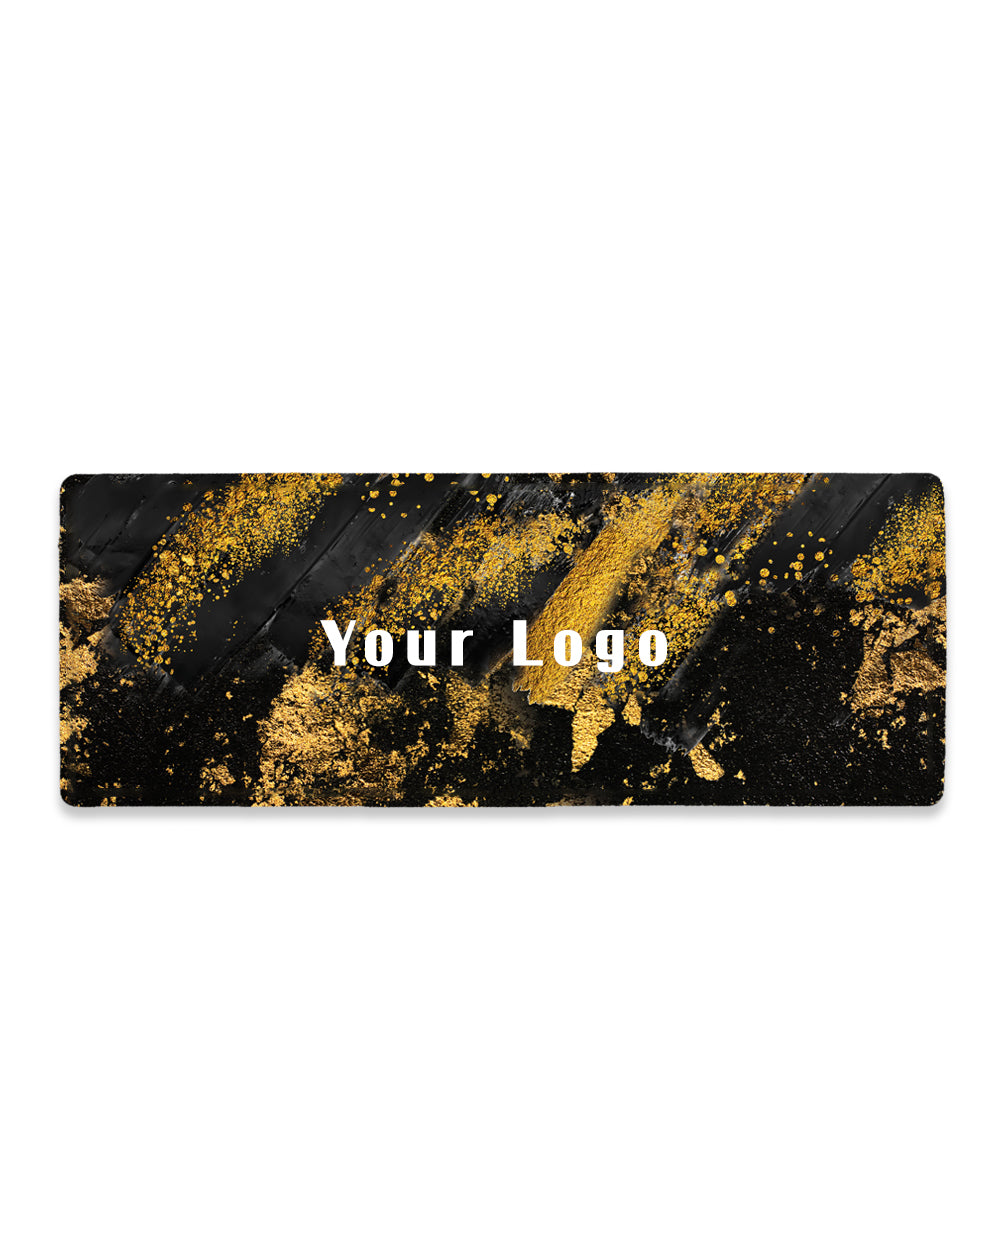 Black Marble Mouse Pad with Nonslip Base (SIZE 12"X 31")